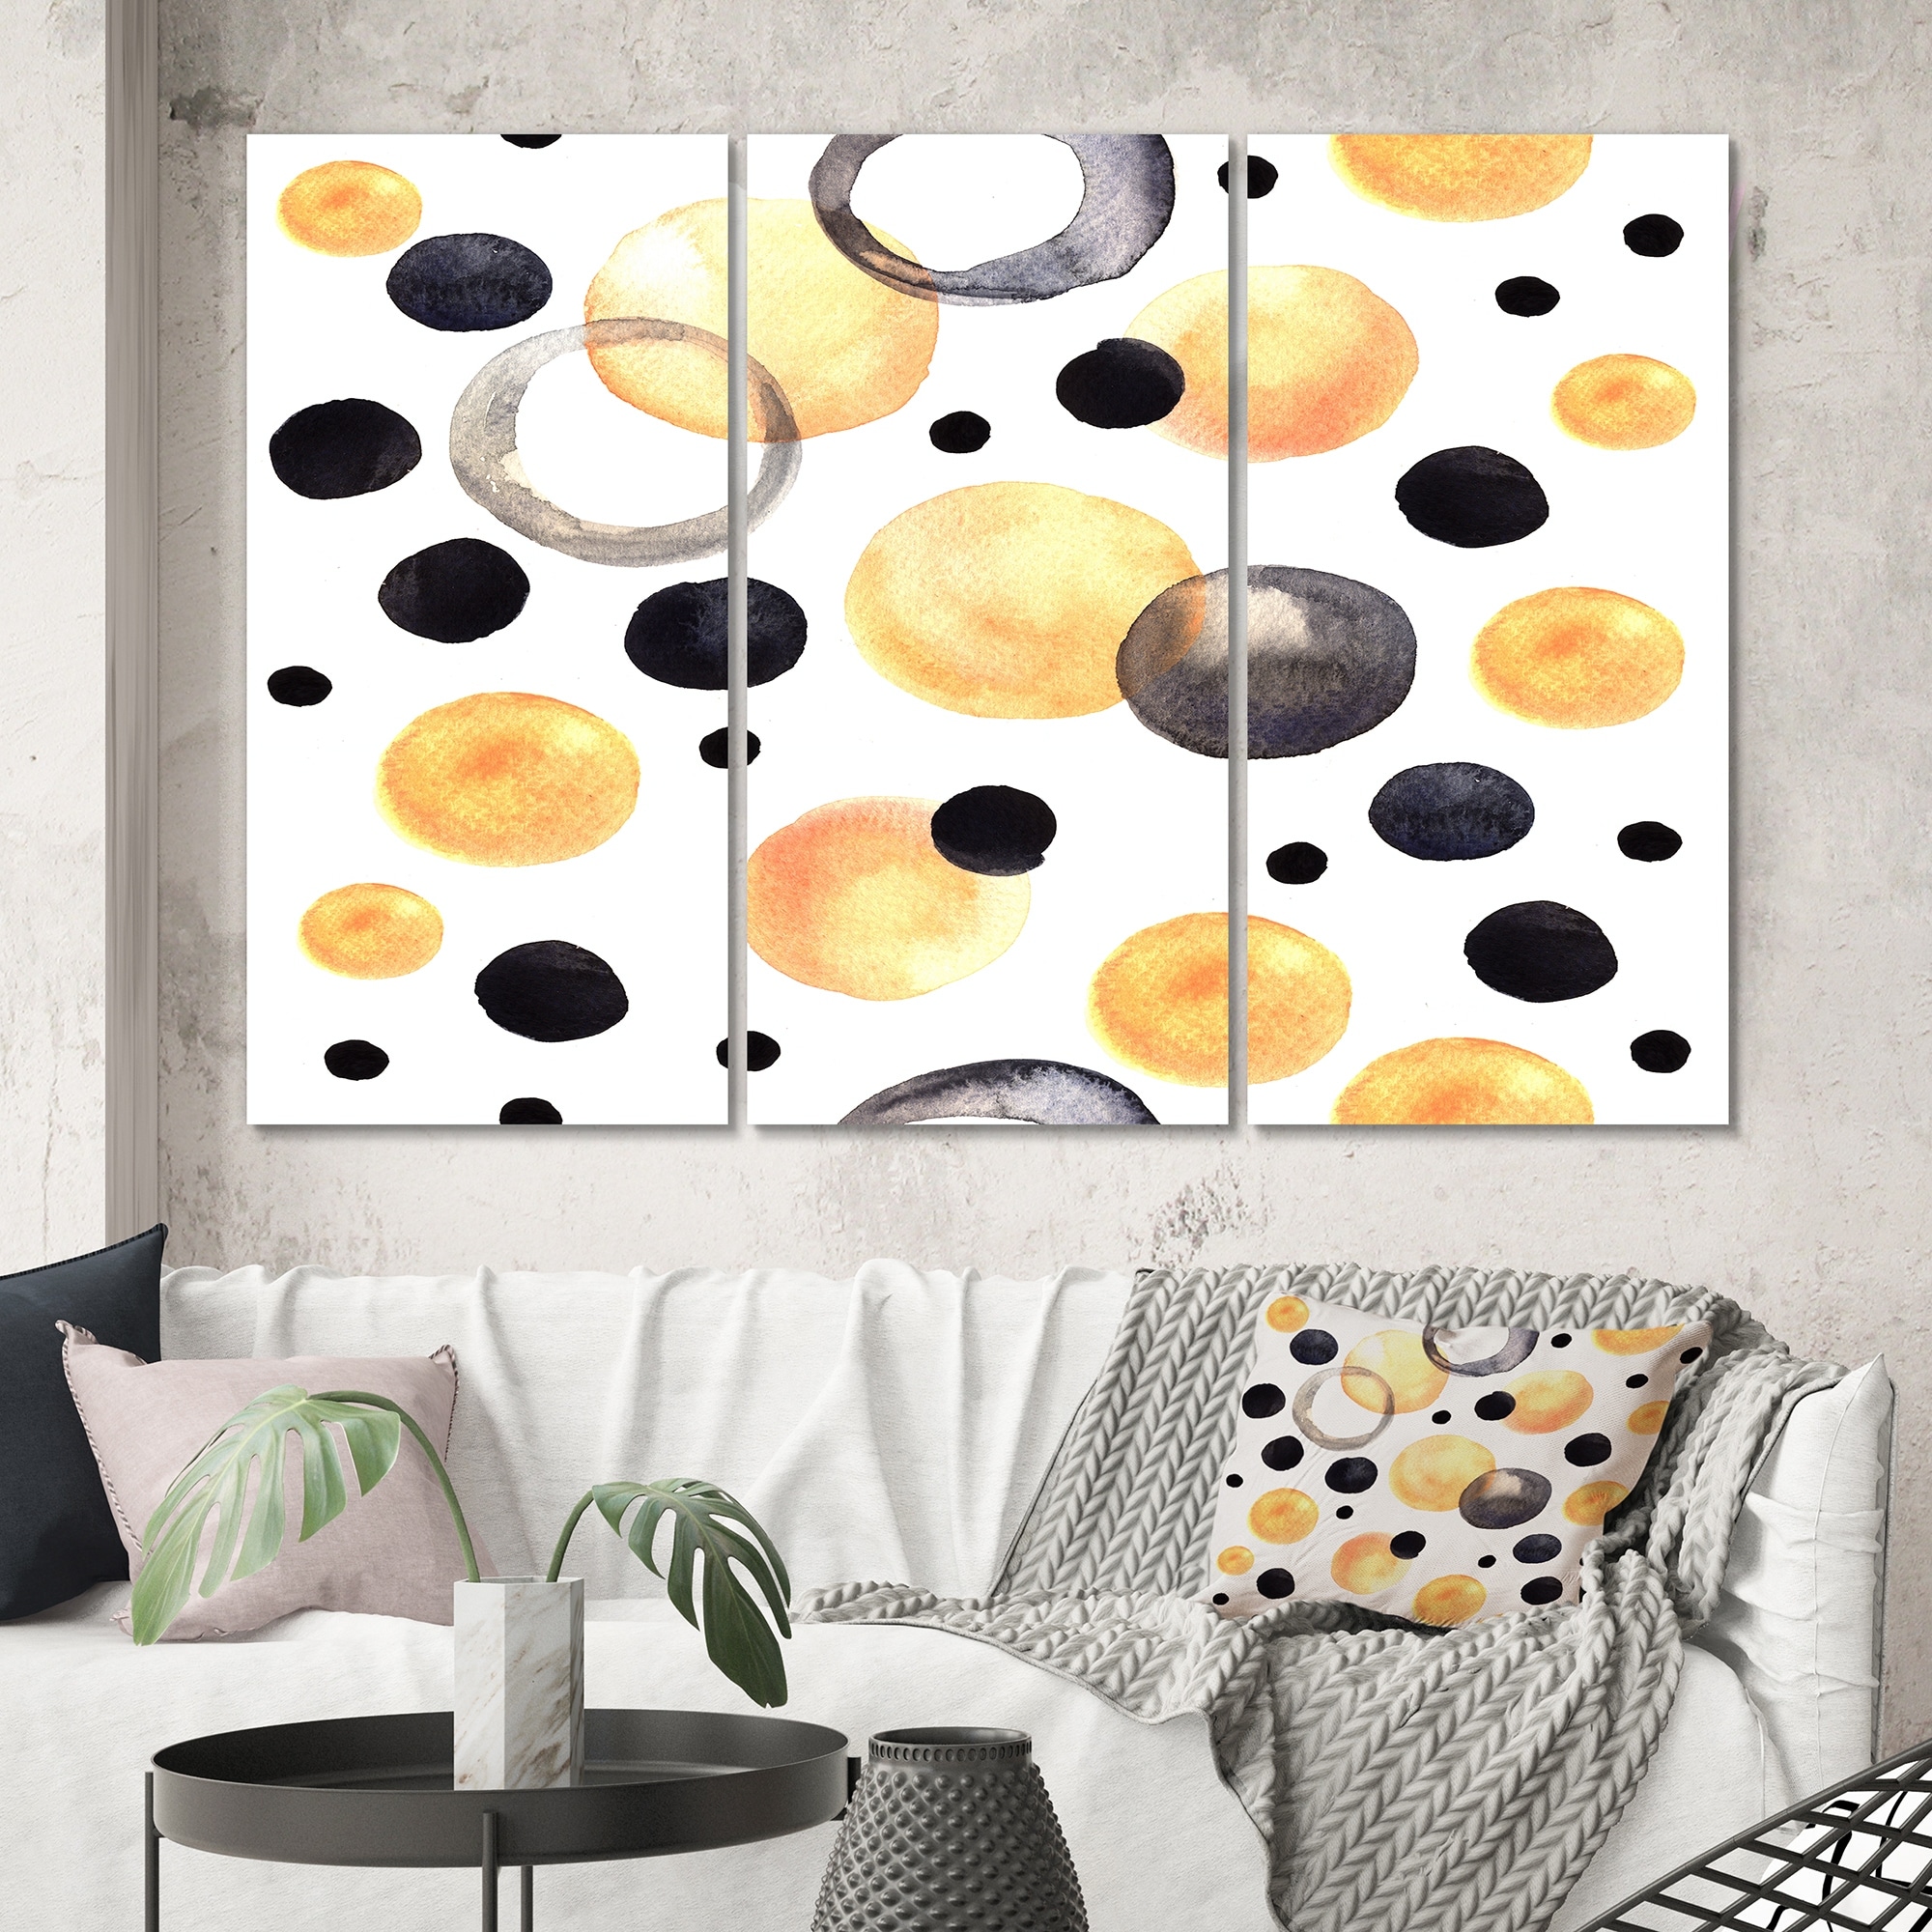 Designart "Black And Yellow Circles On White" Patterned Canvas Wall Art Print